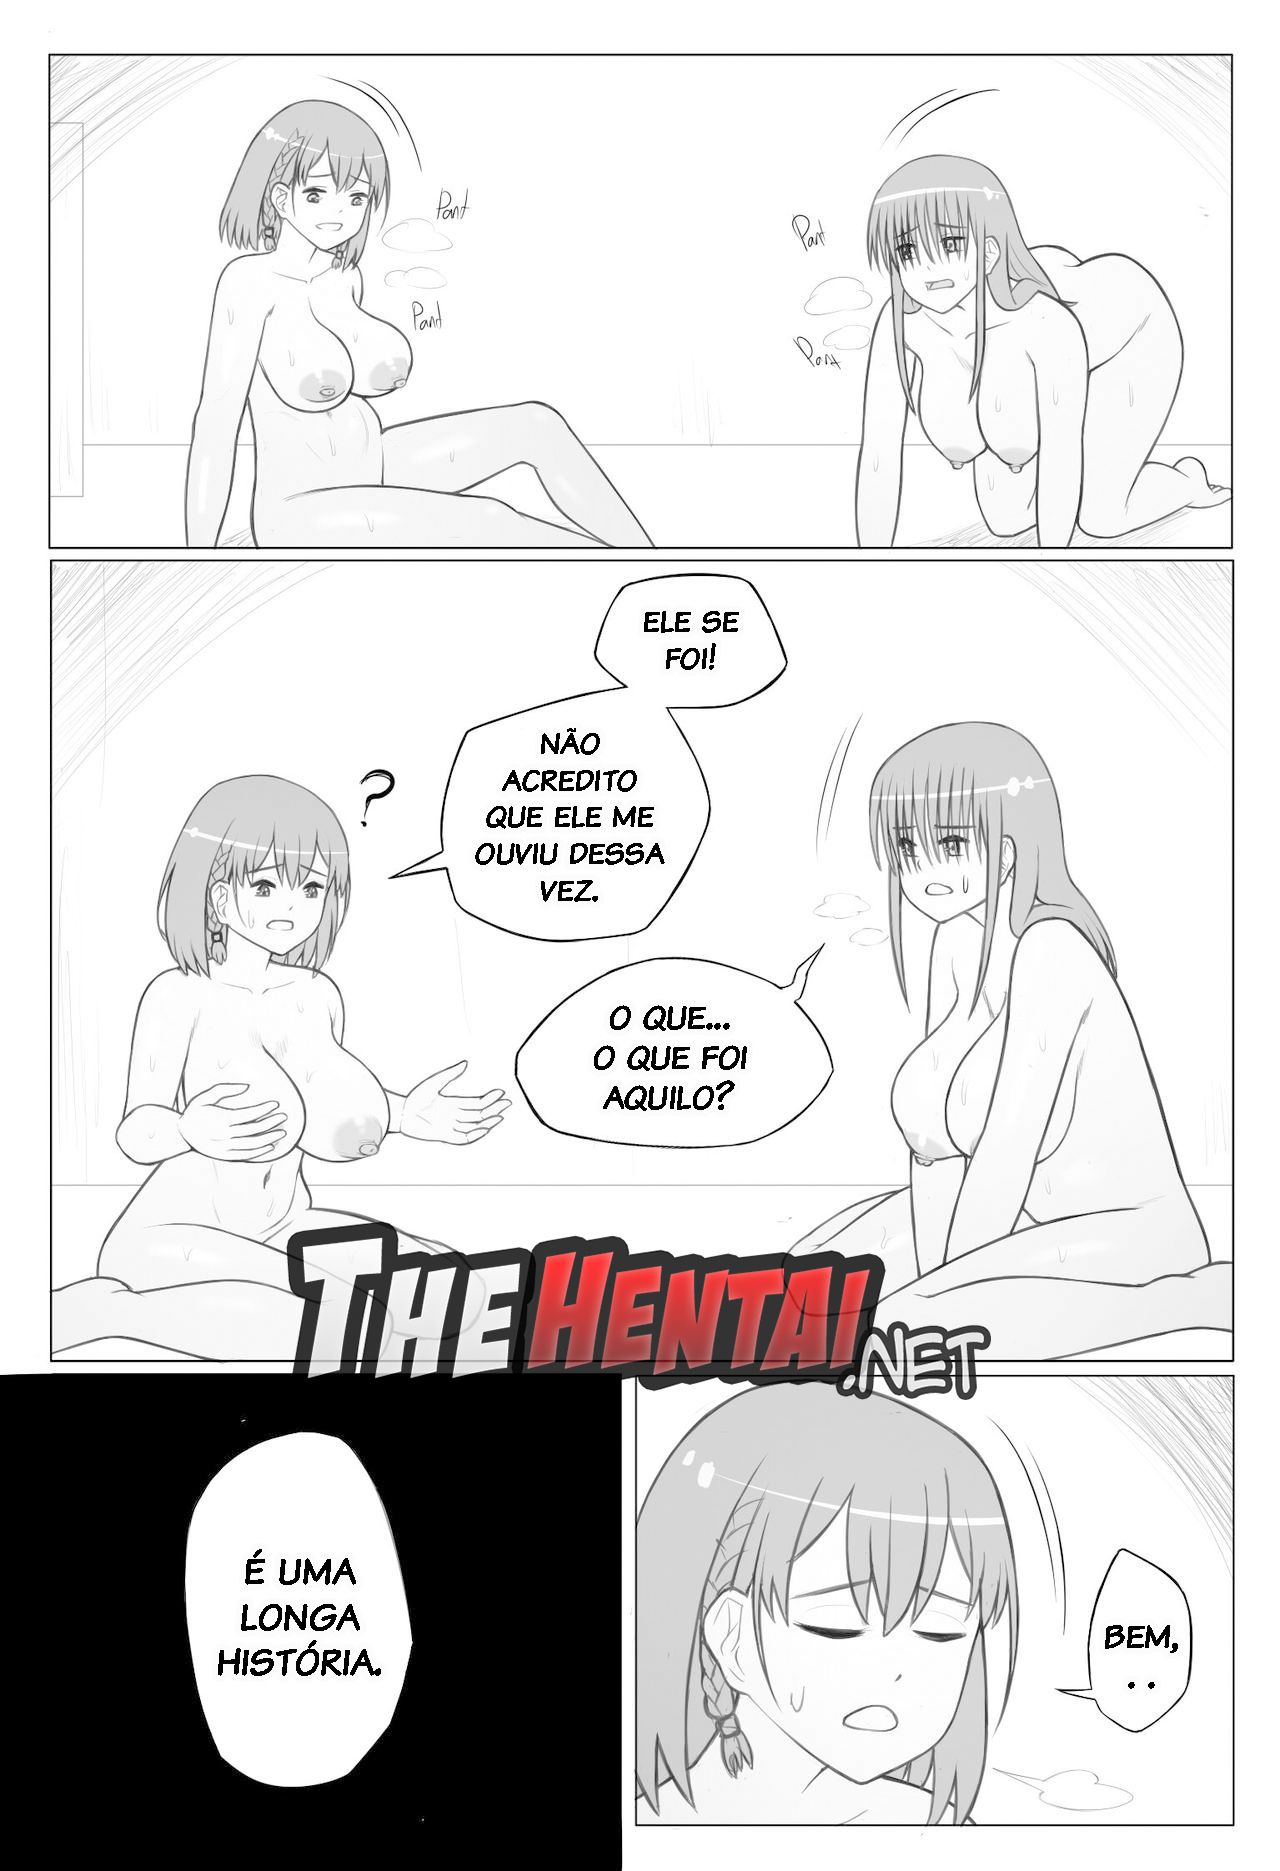 A Monday Night Haunting Hentai pt-br 20